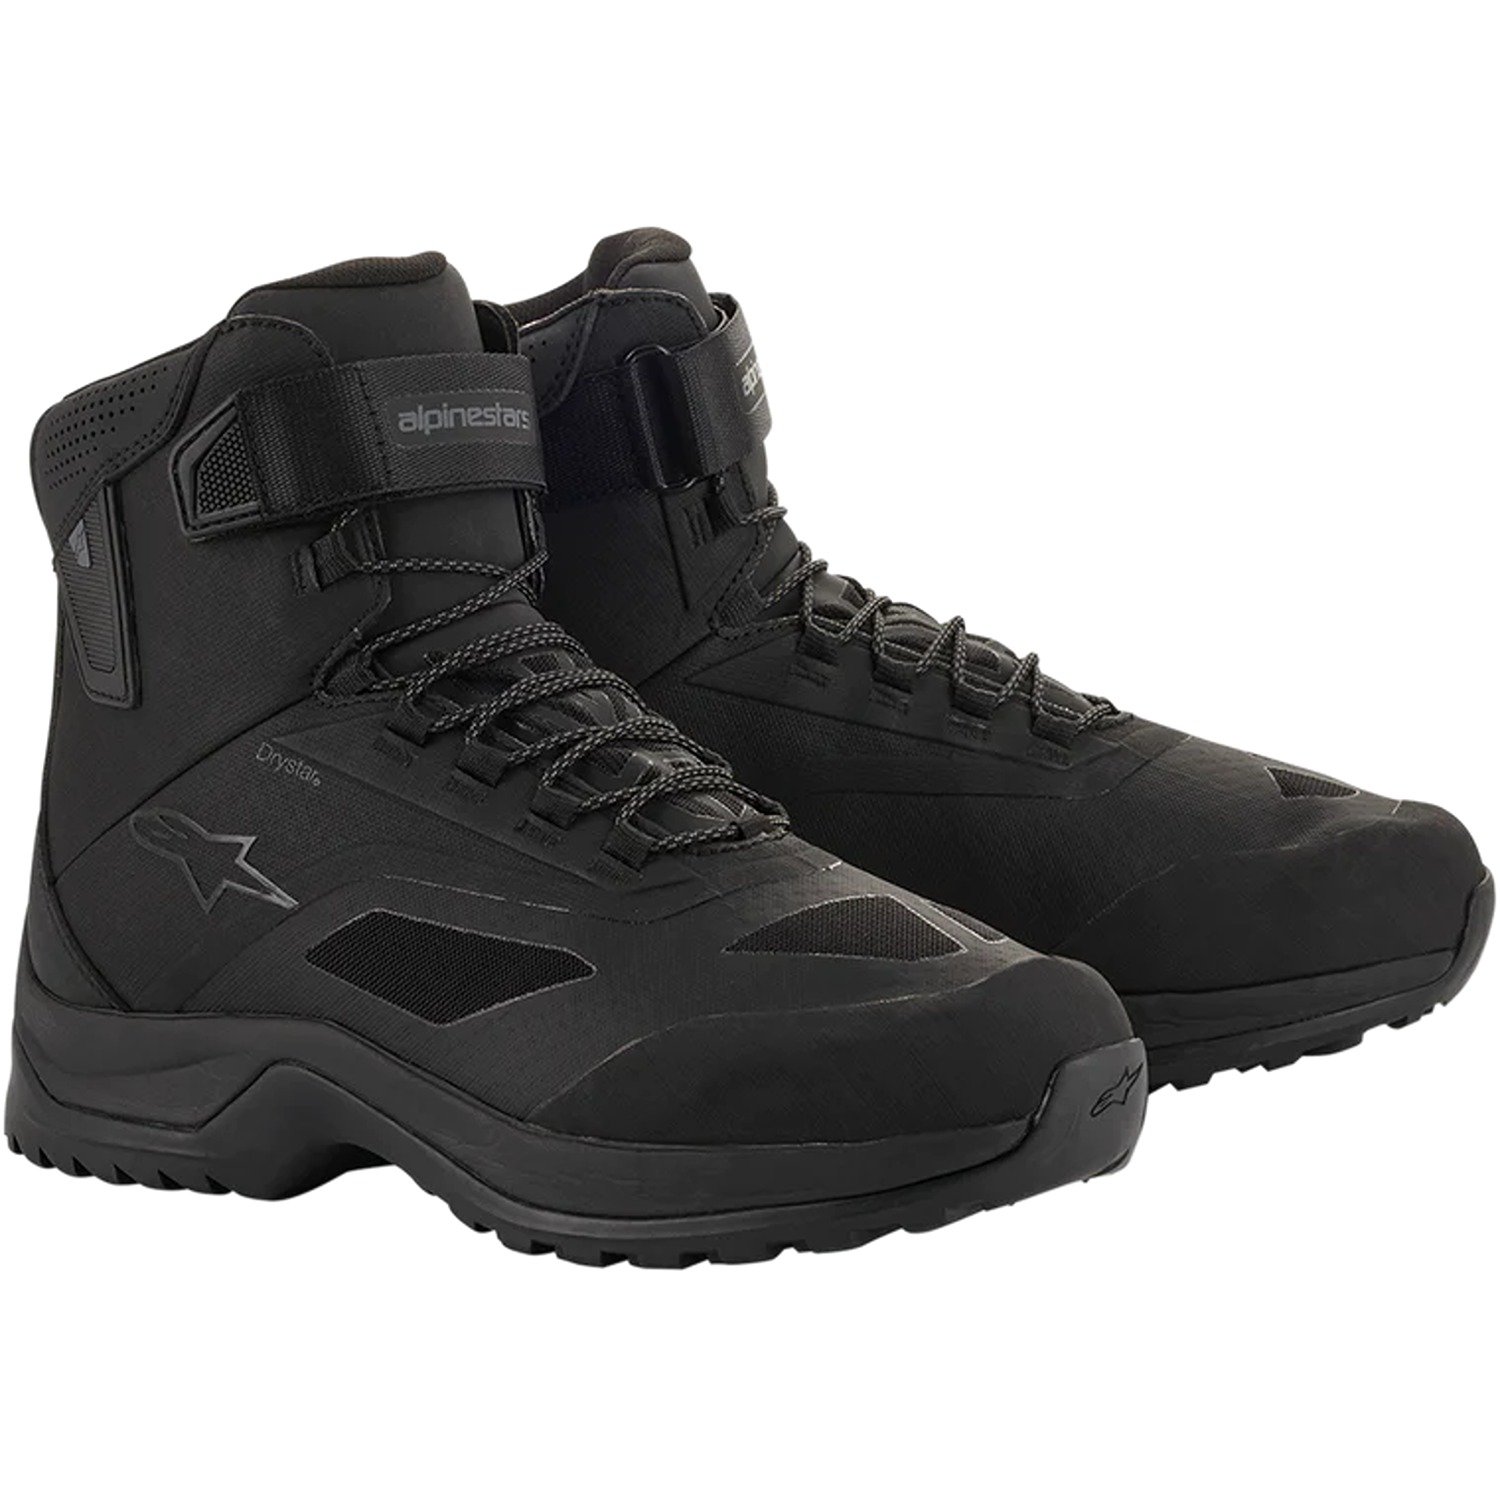 Image of Alpinestars CR-6 Drystar Riding Shoes Black Taille US 85